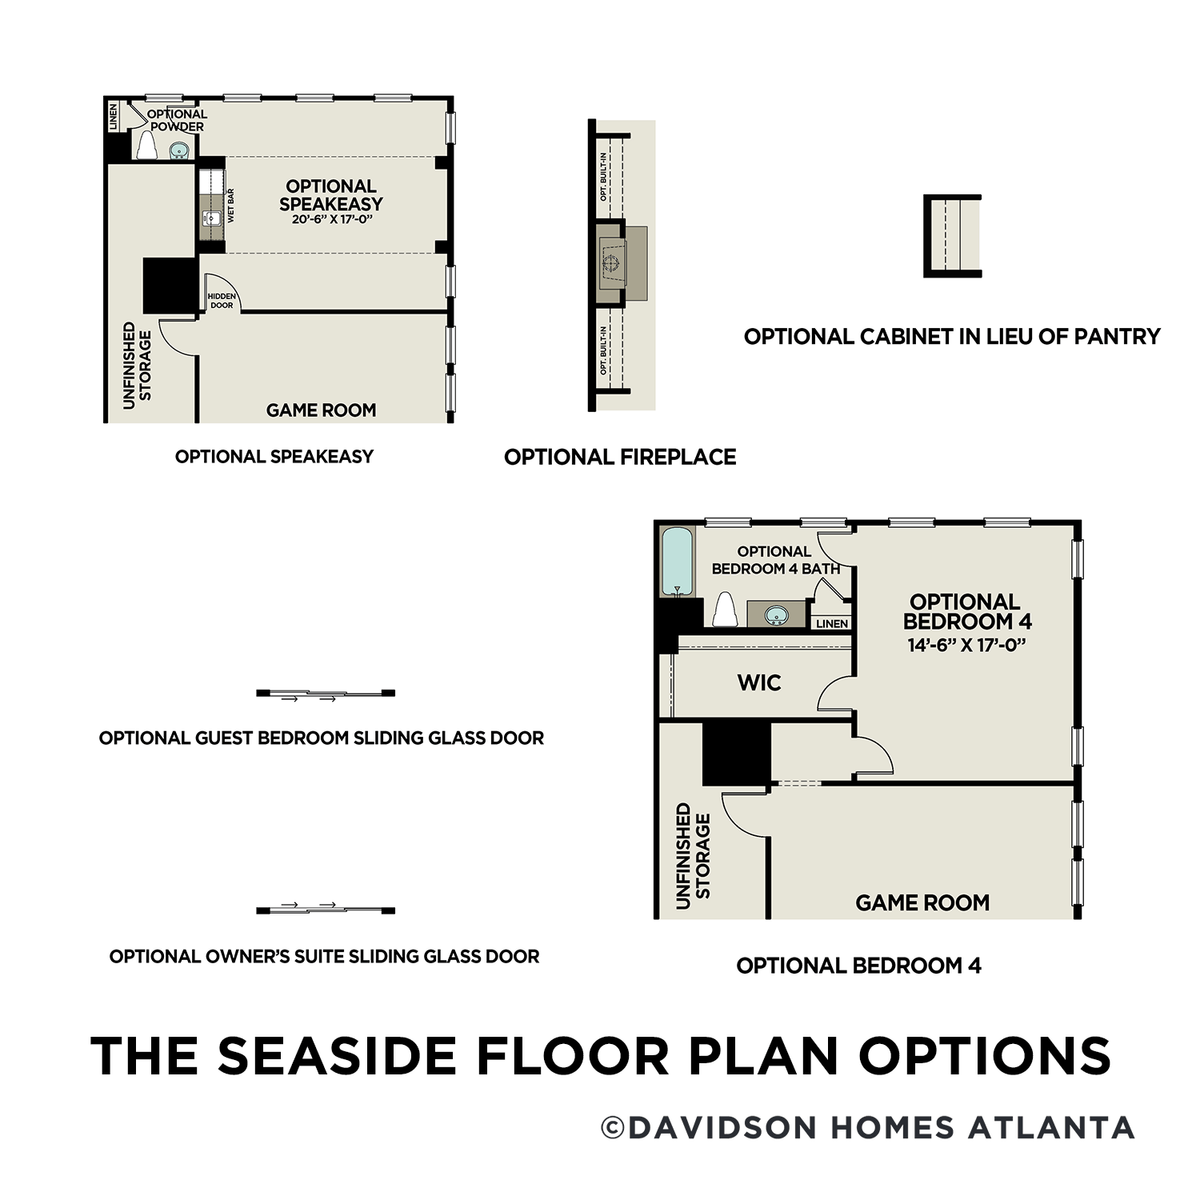 3 - The Seaside A floor plan layout for 89 Batten Board Way in Davidson Homes' The Village at Towne Lake community.